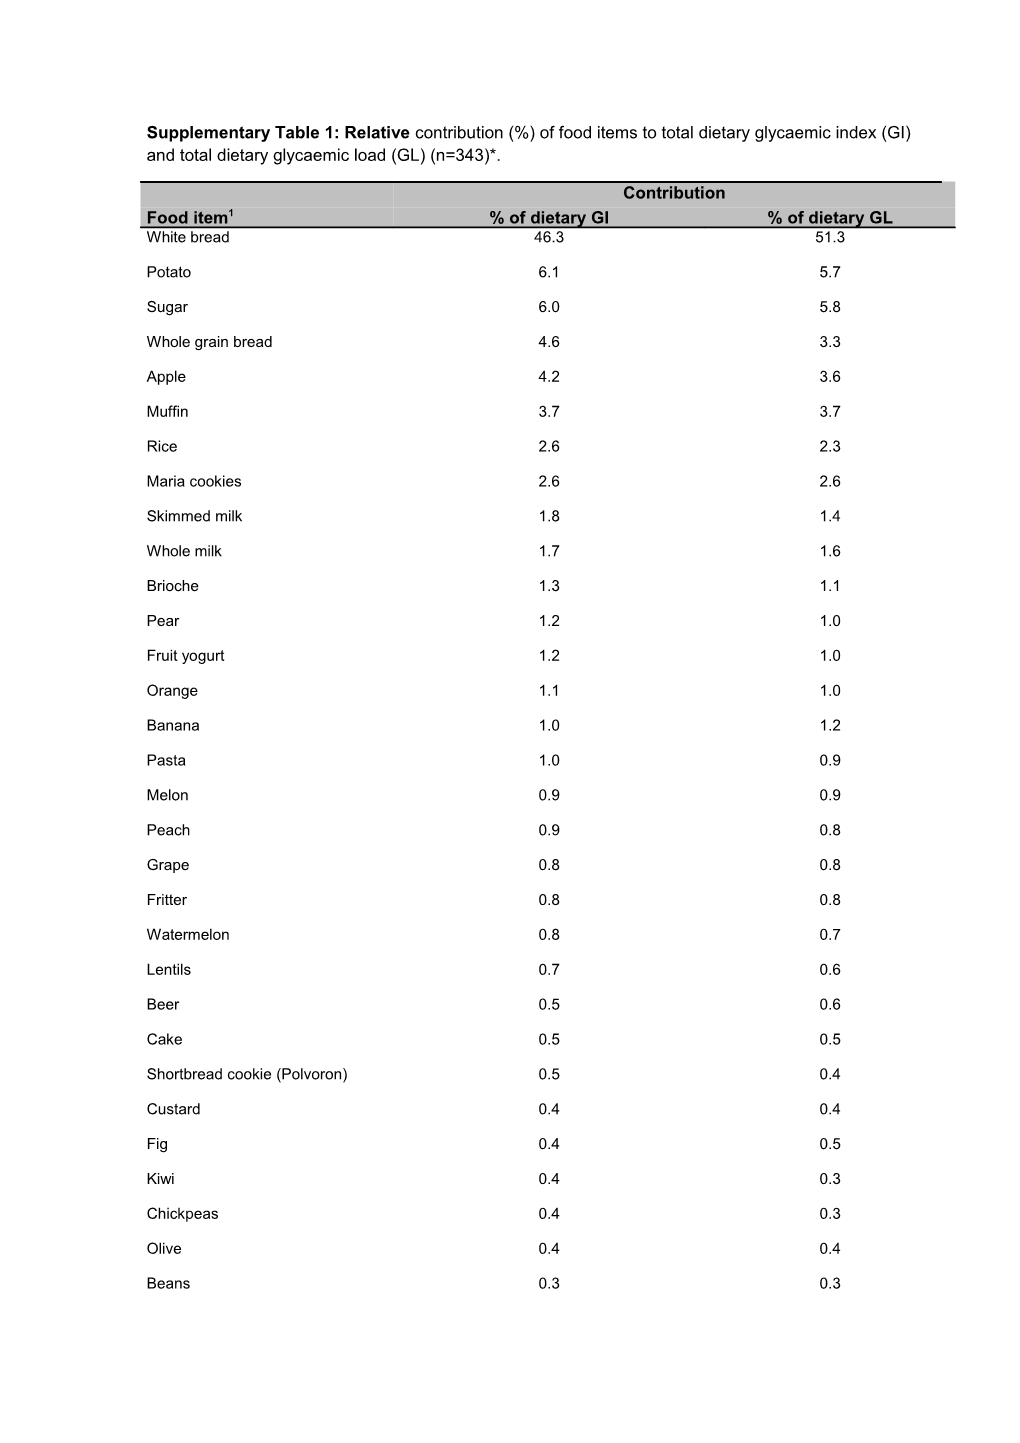 Supplementary Table 1: Contribution of Food Items to Total Dietary Glycaemic Index (GI)